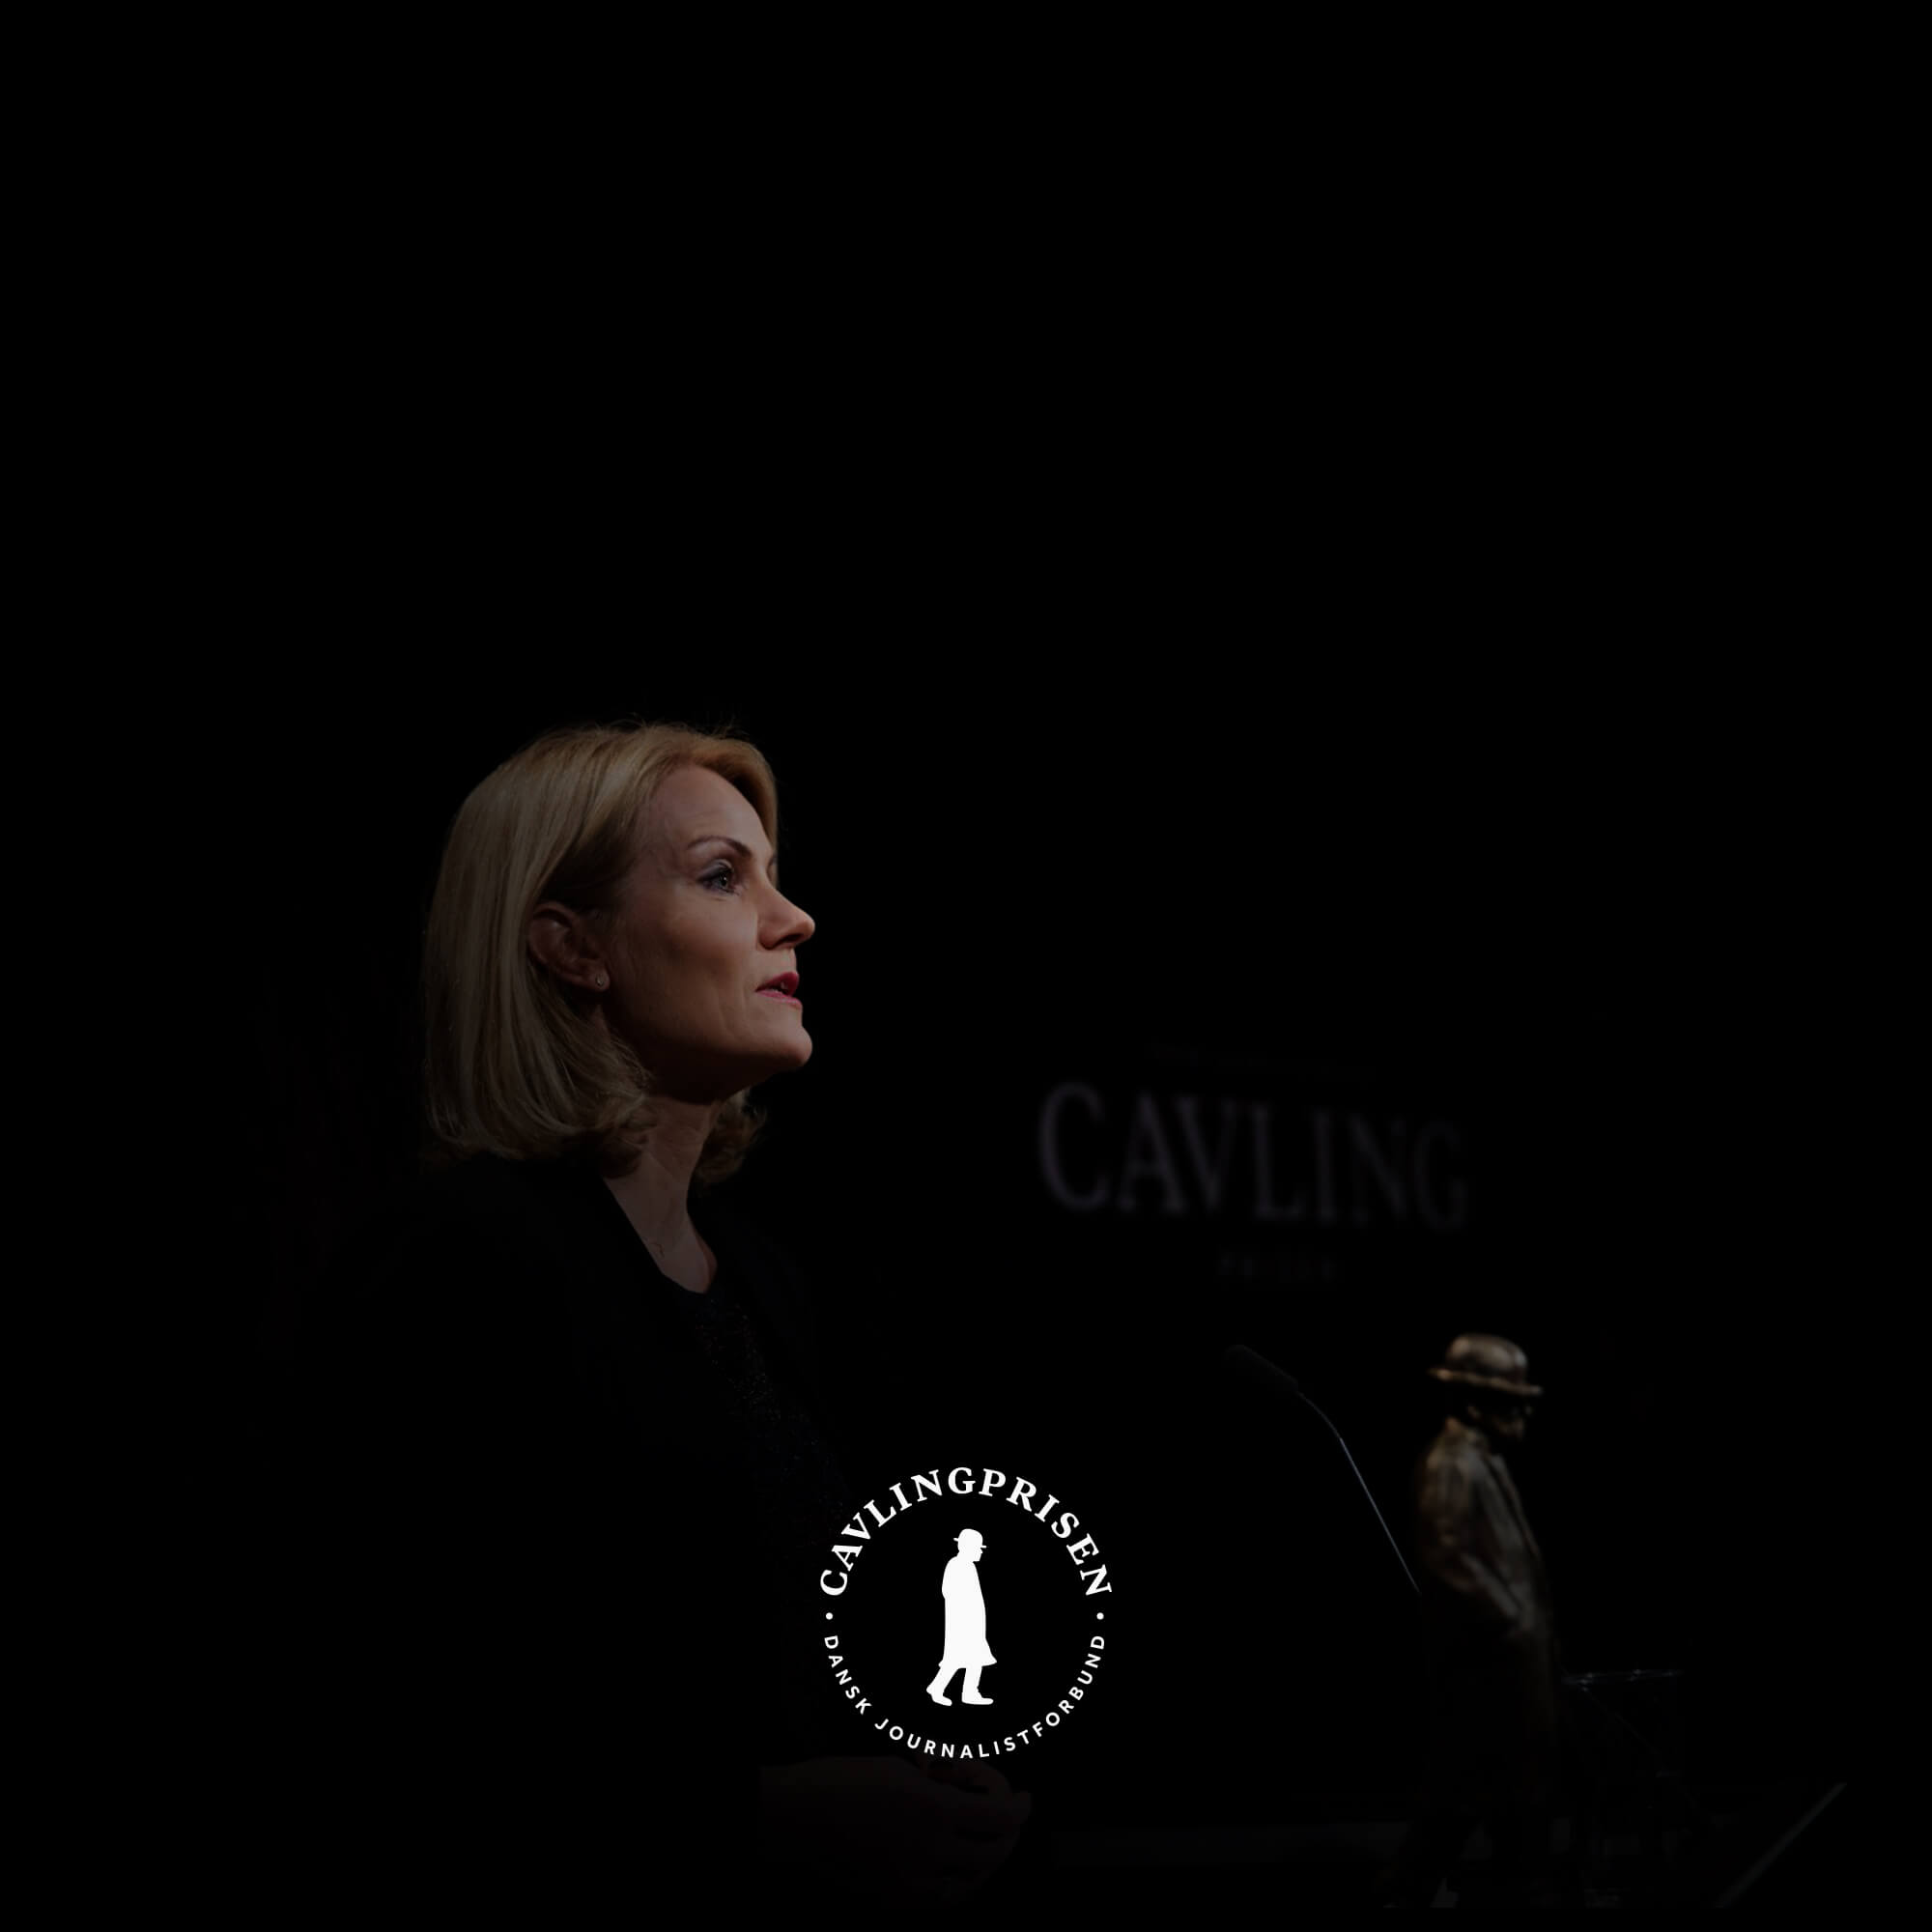 andreas_weiland_cavling_prisen_helle_thorning